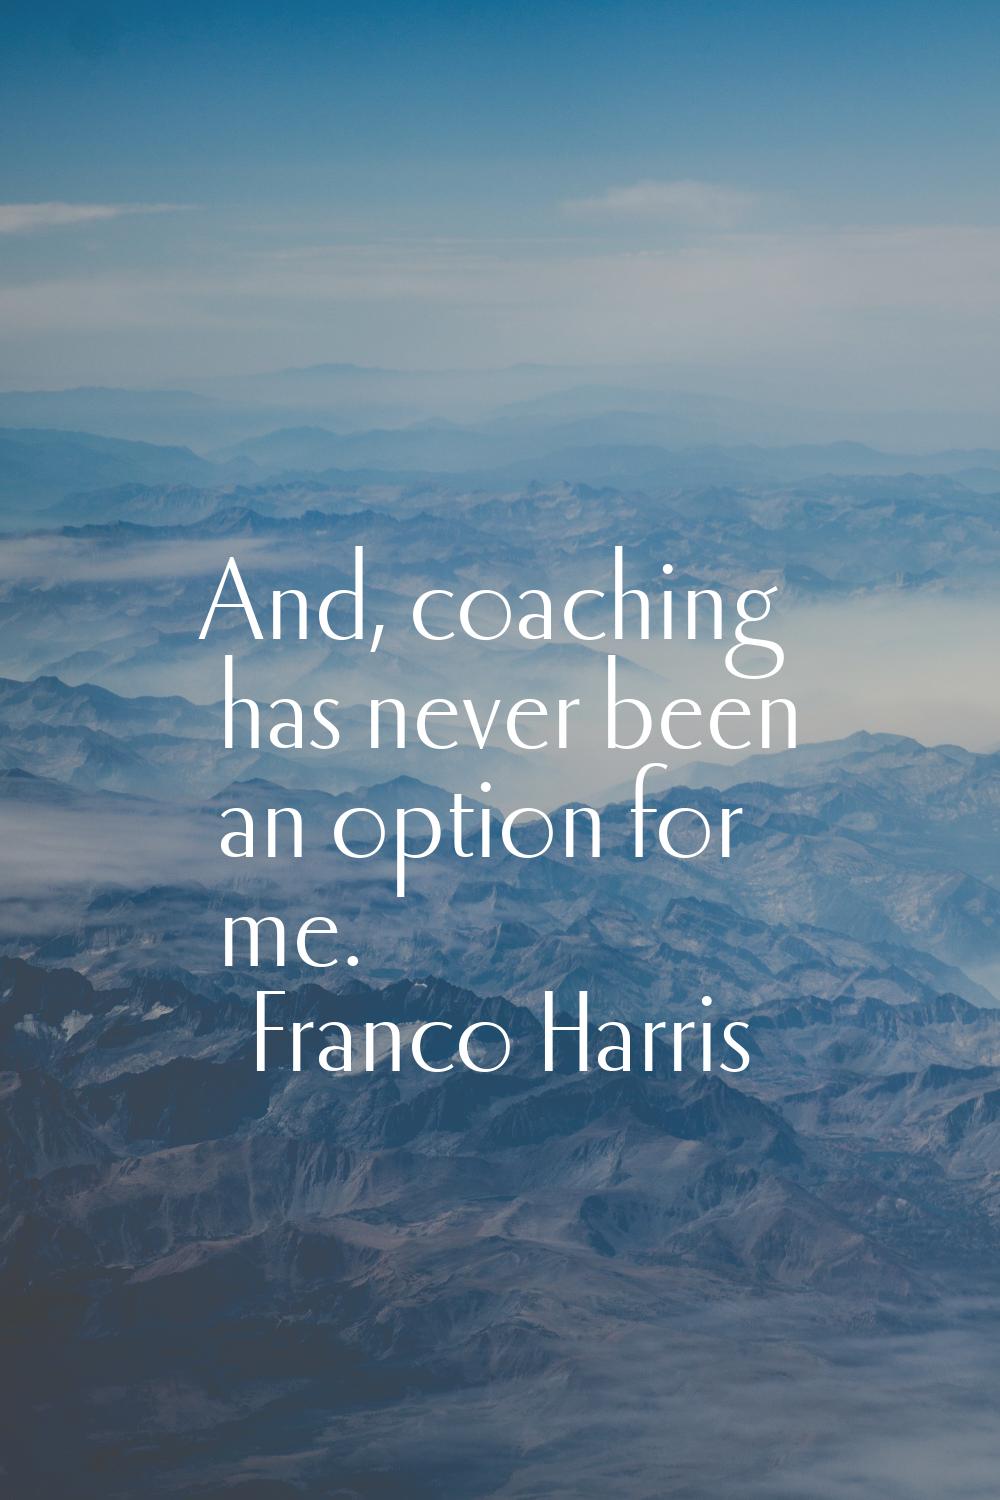 And, coaching has never been an option for me.